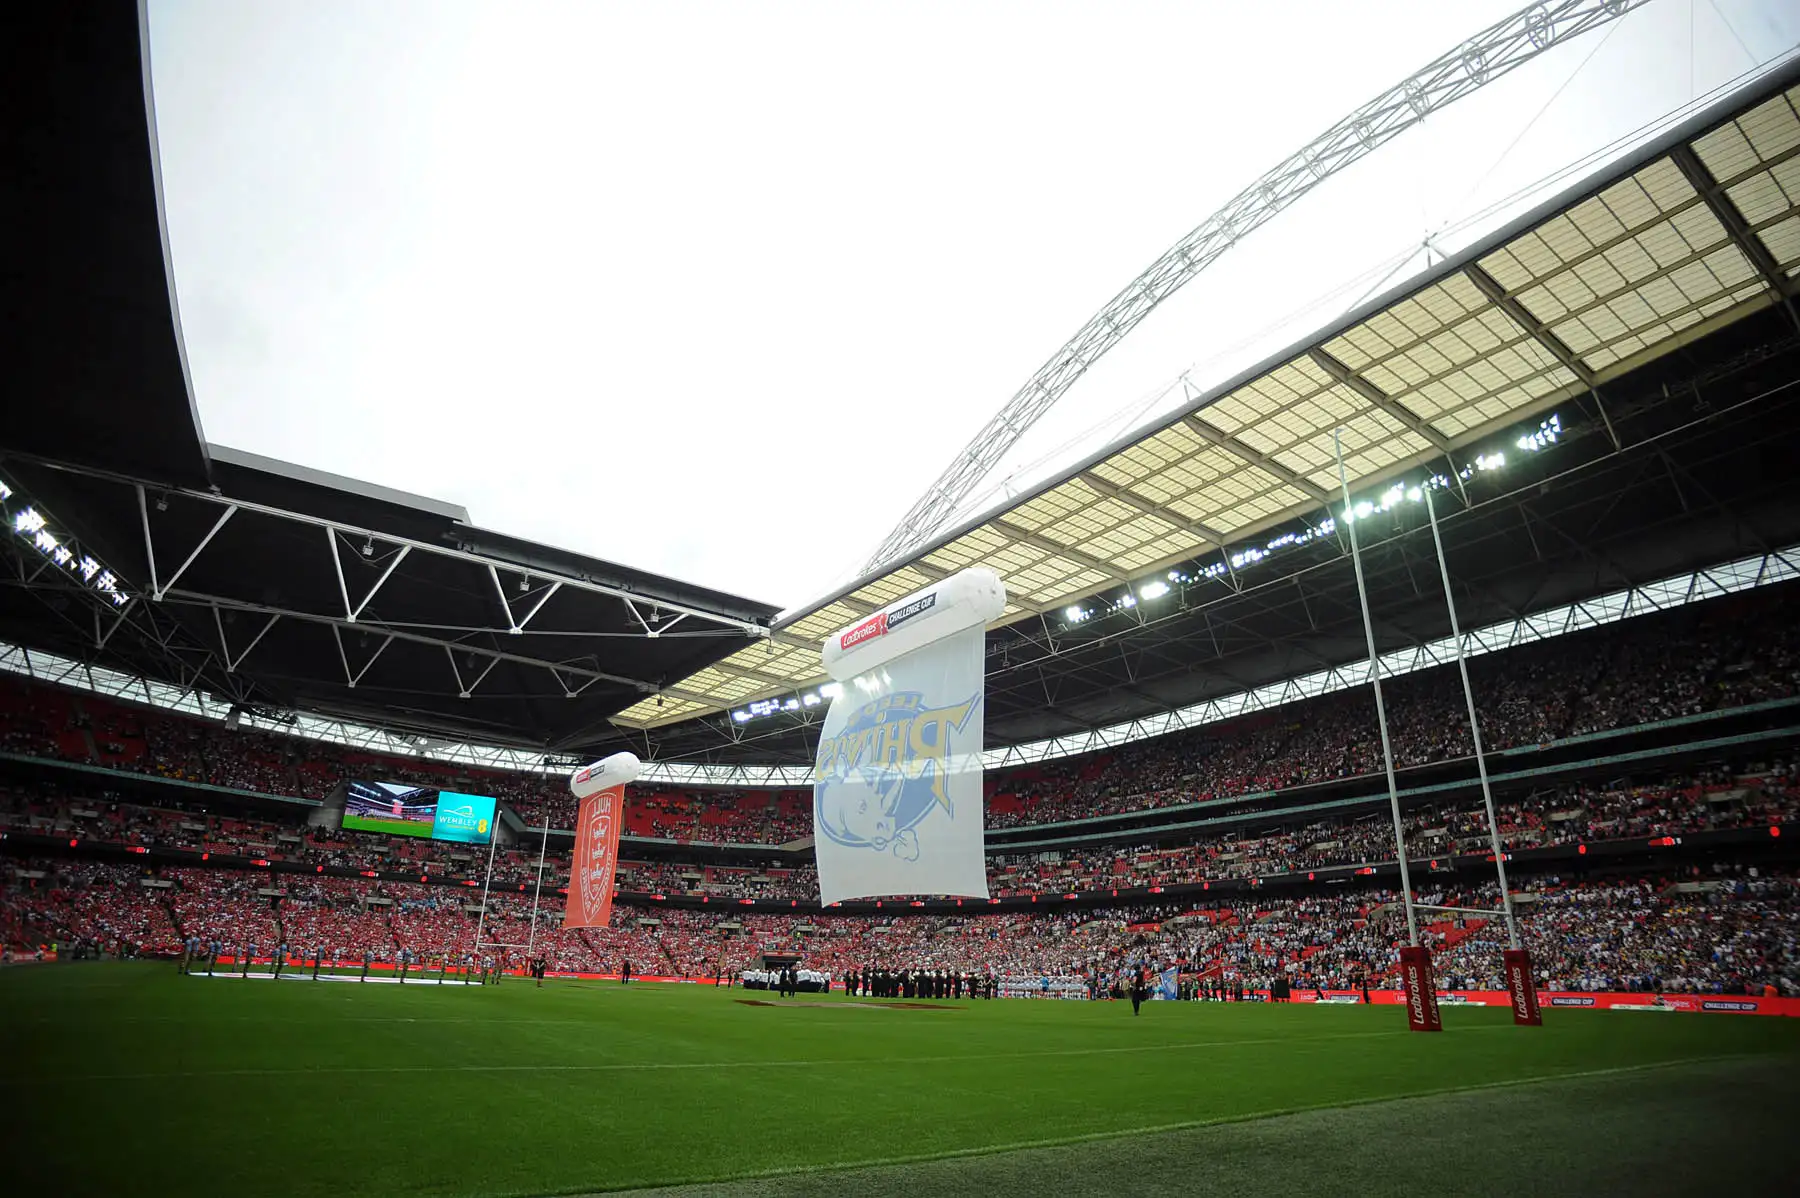 RFL relaxed about potential Wembley Stadium sale